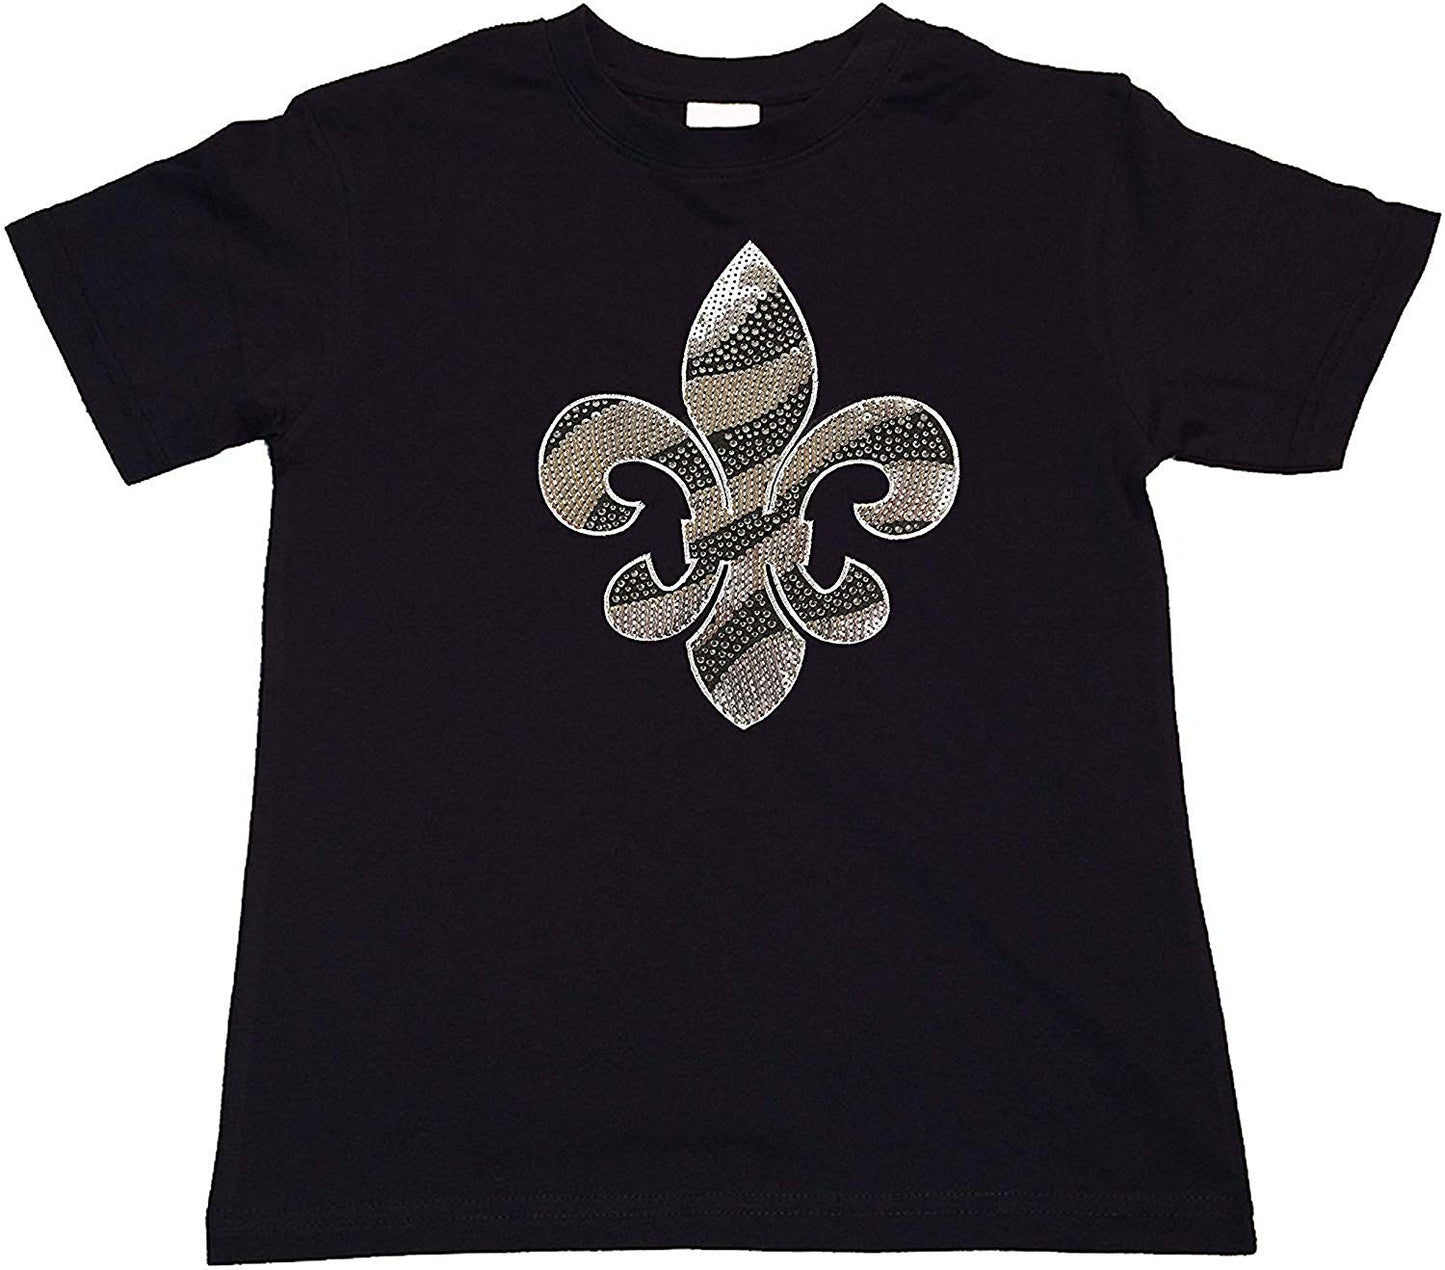 Girls Rhinestone T-Shirt " Silver Sequins and Rhinestones Fleur de Lis " Kids Size 3 to 14 Available